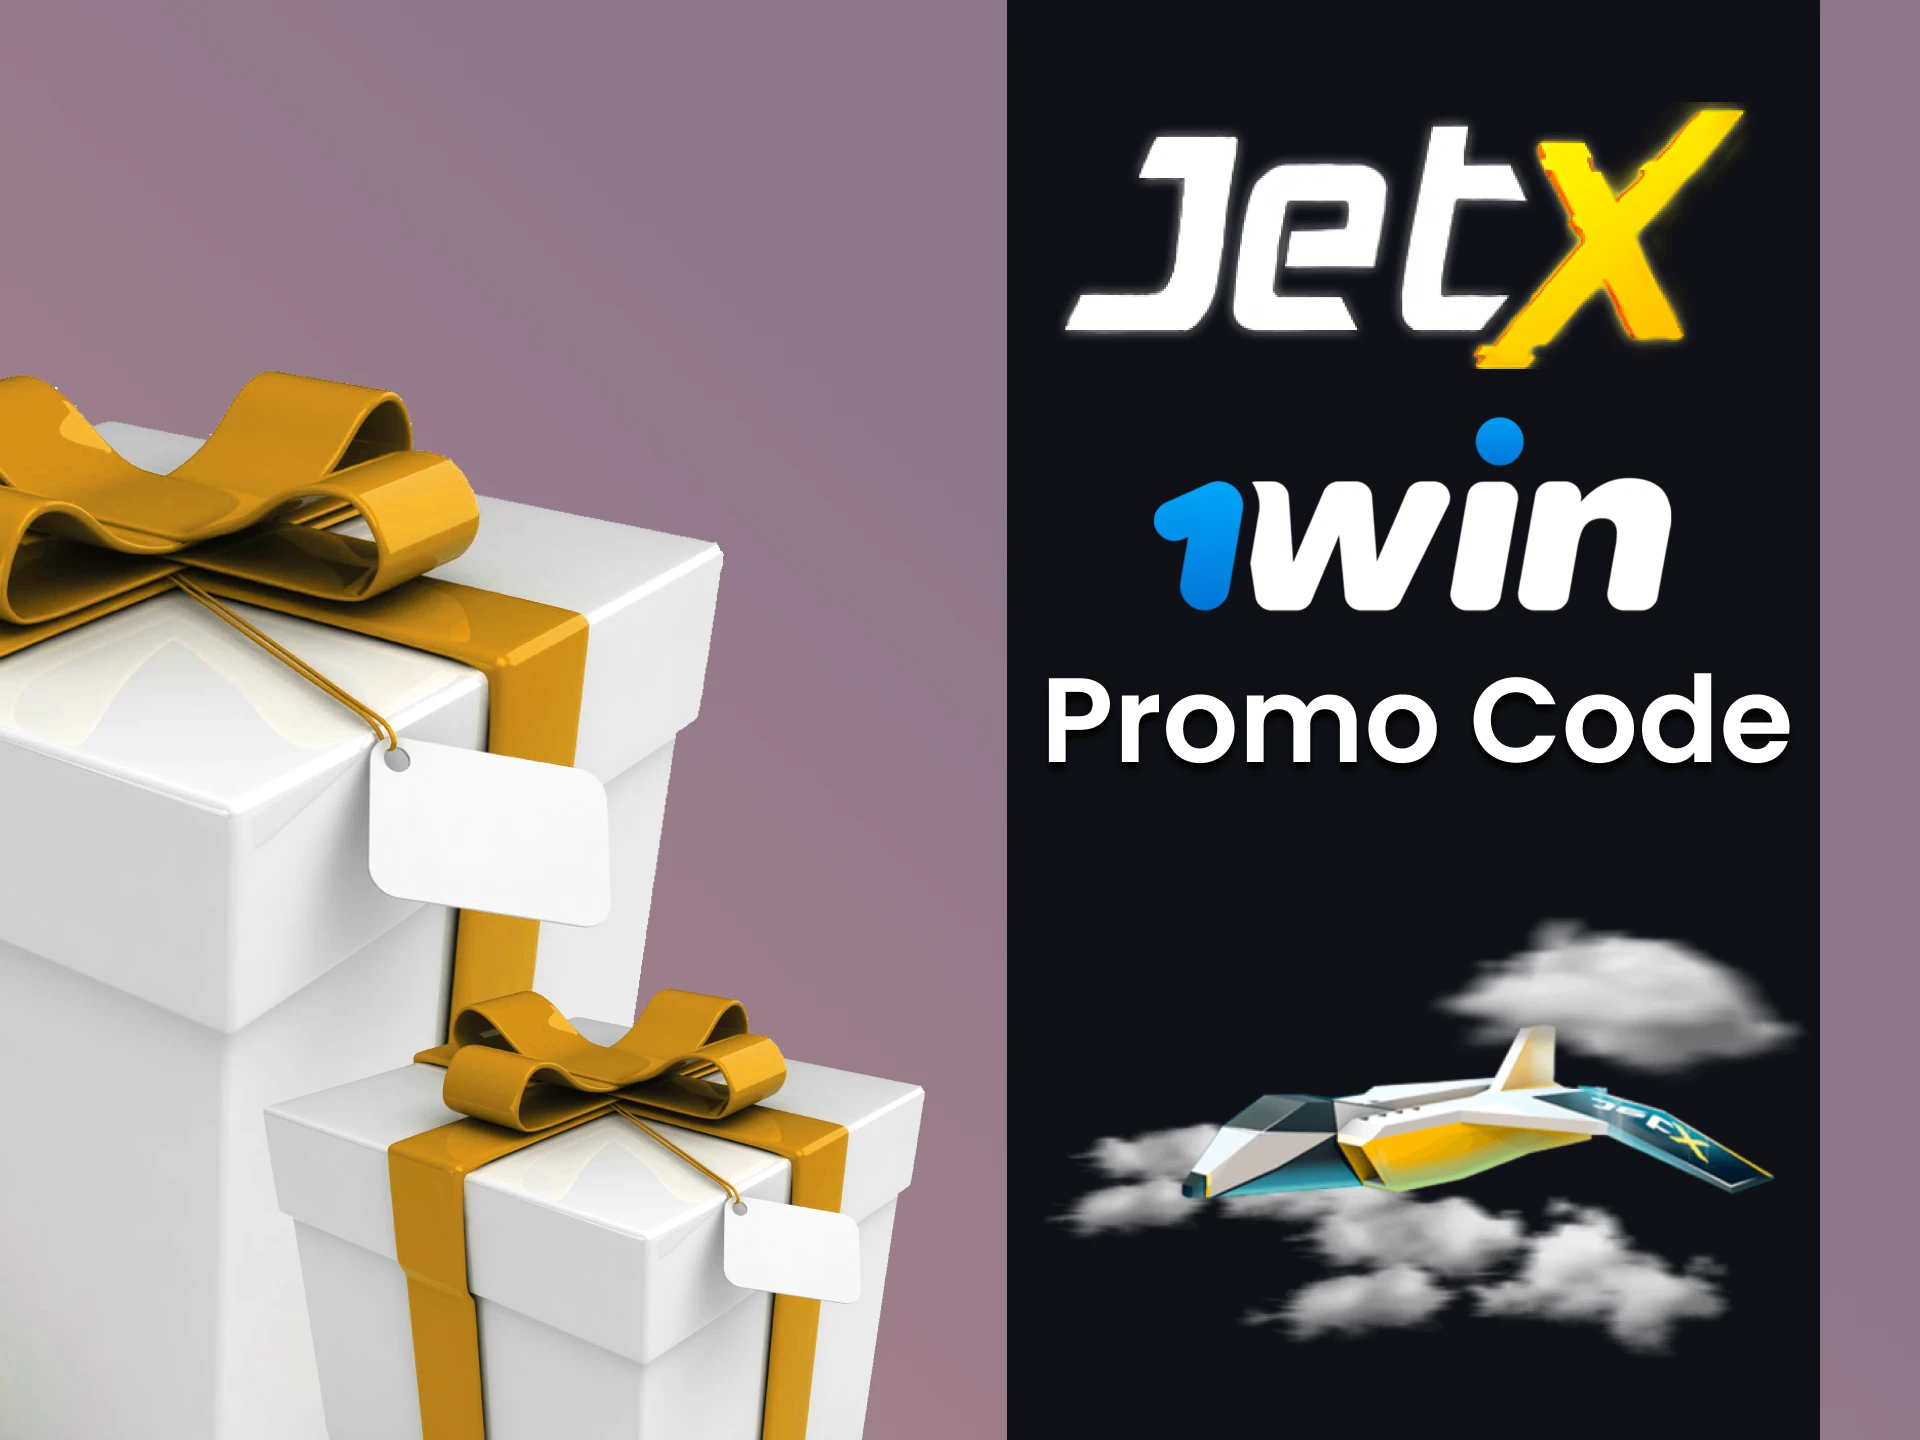 1win has a promo code for the game JetX.